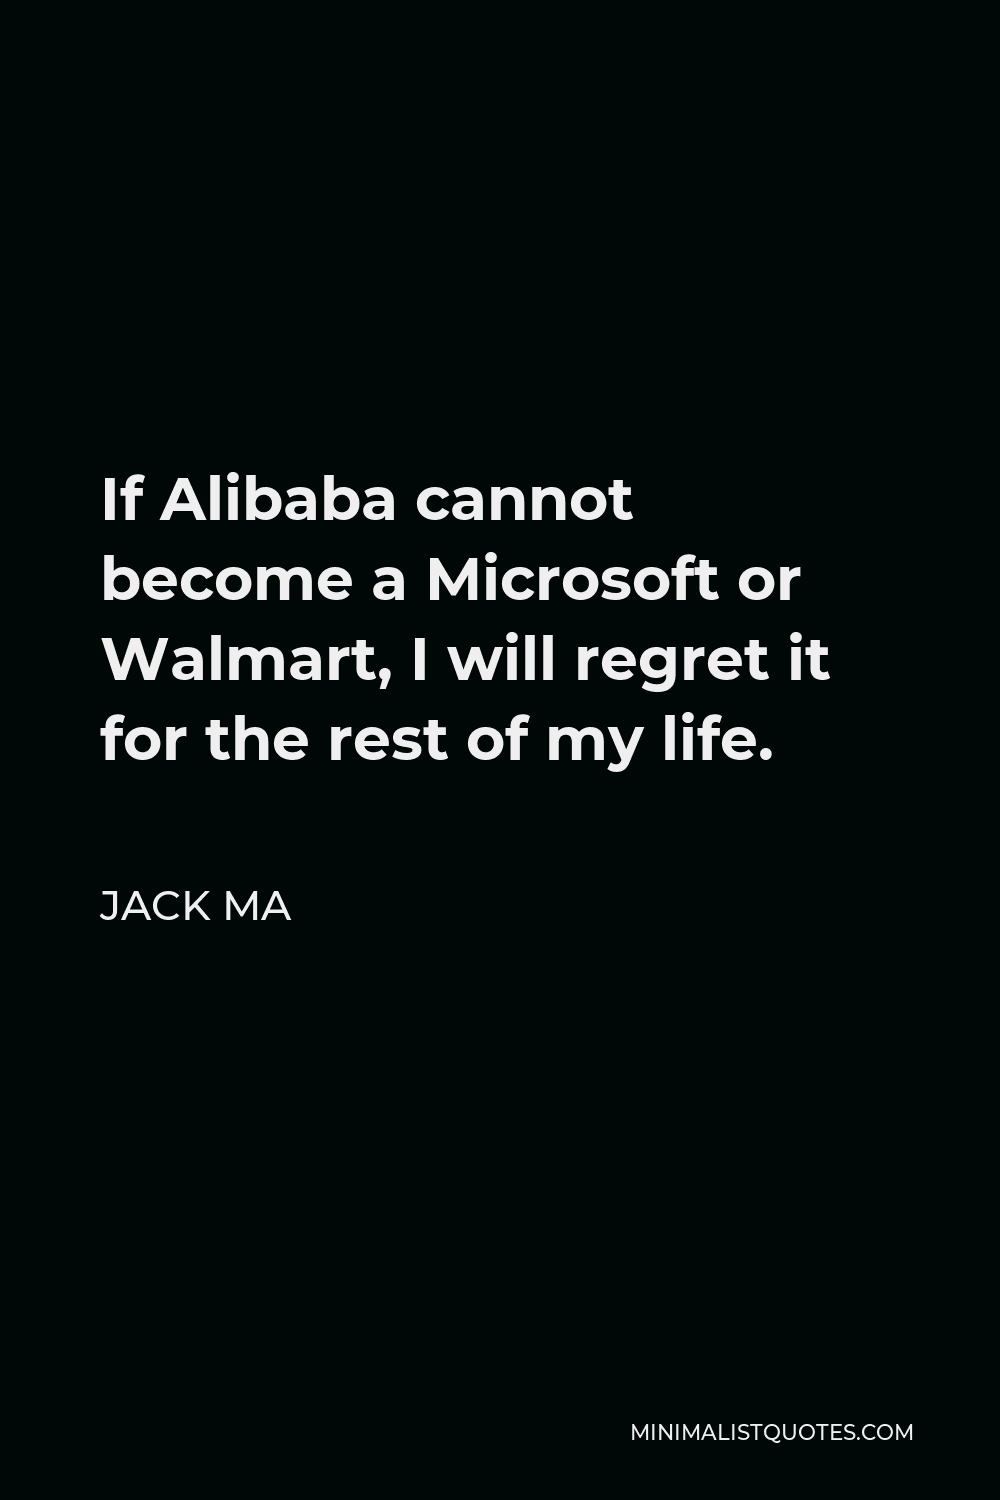 Jack Ma Quote - If Alibaba cannot become a Microsoft or Walmart, I will regret it for the rest of my life.